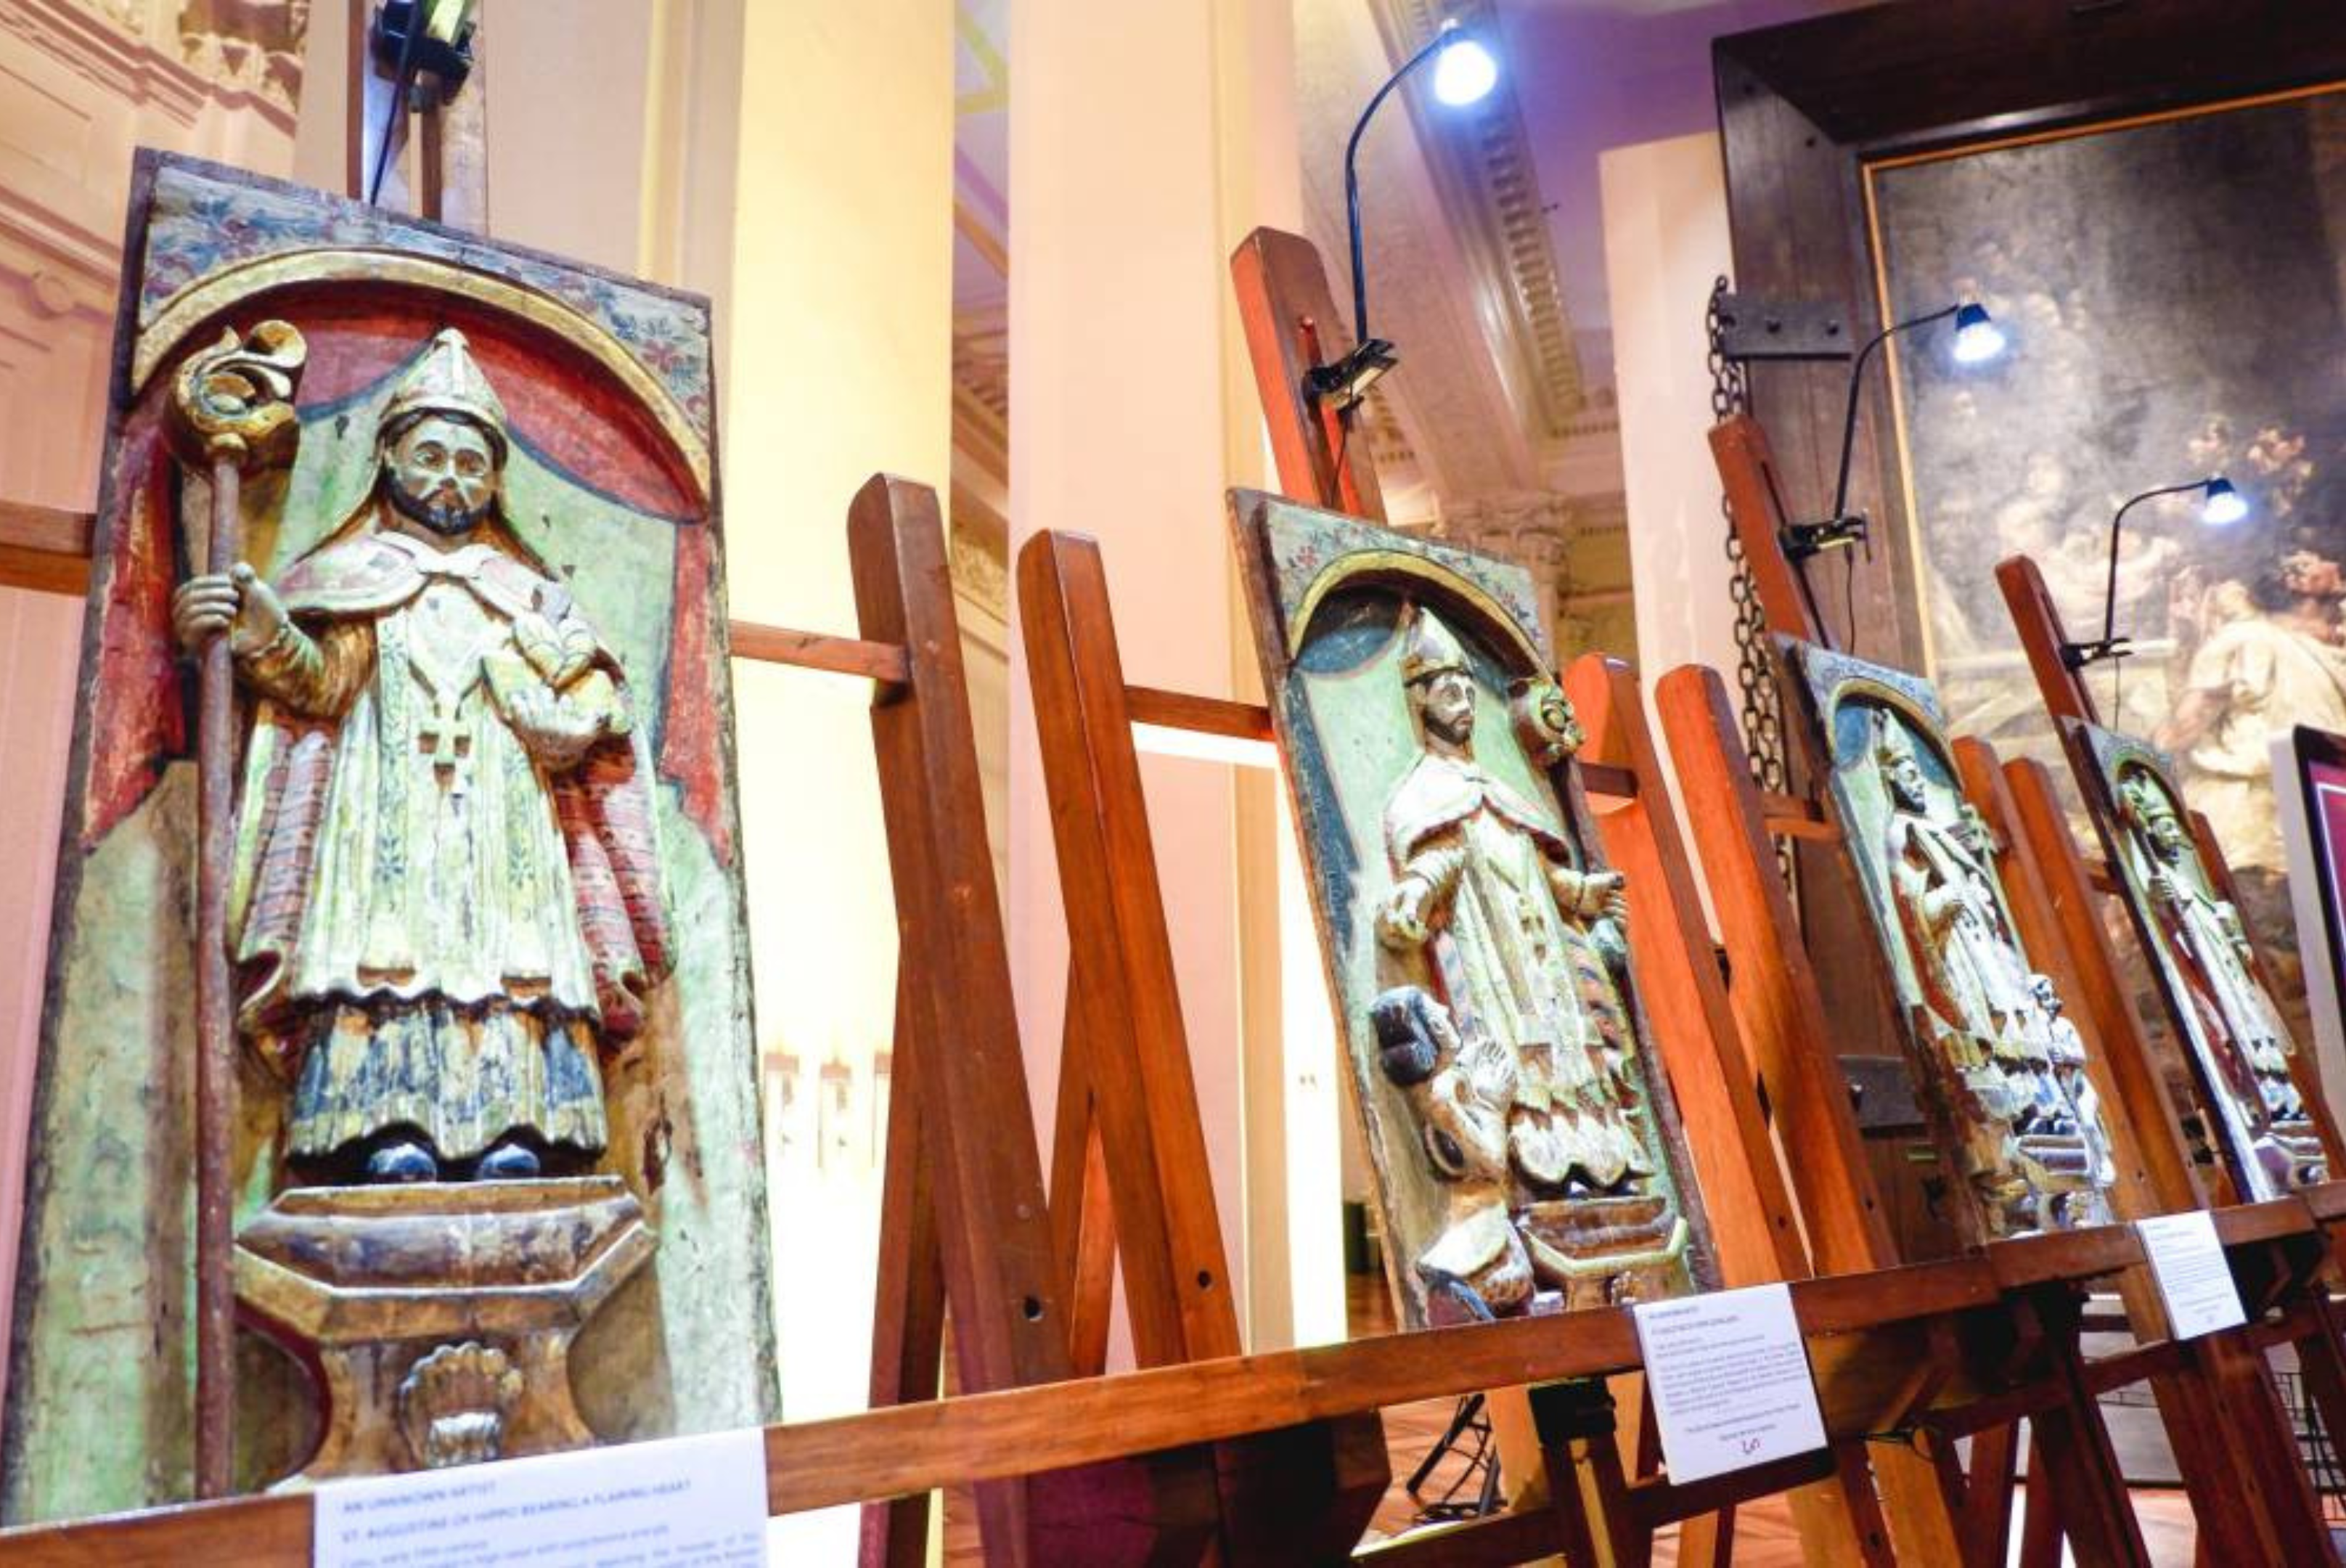 Boljoon pulpit panels donation to National Museum sparks outcry